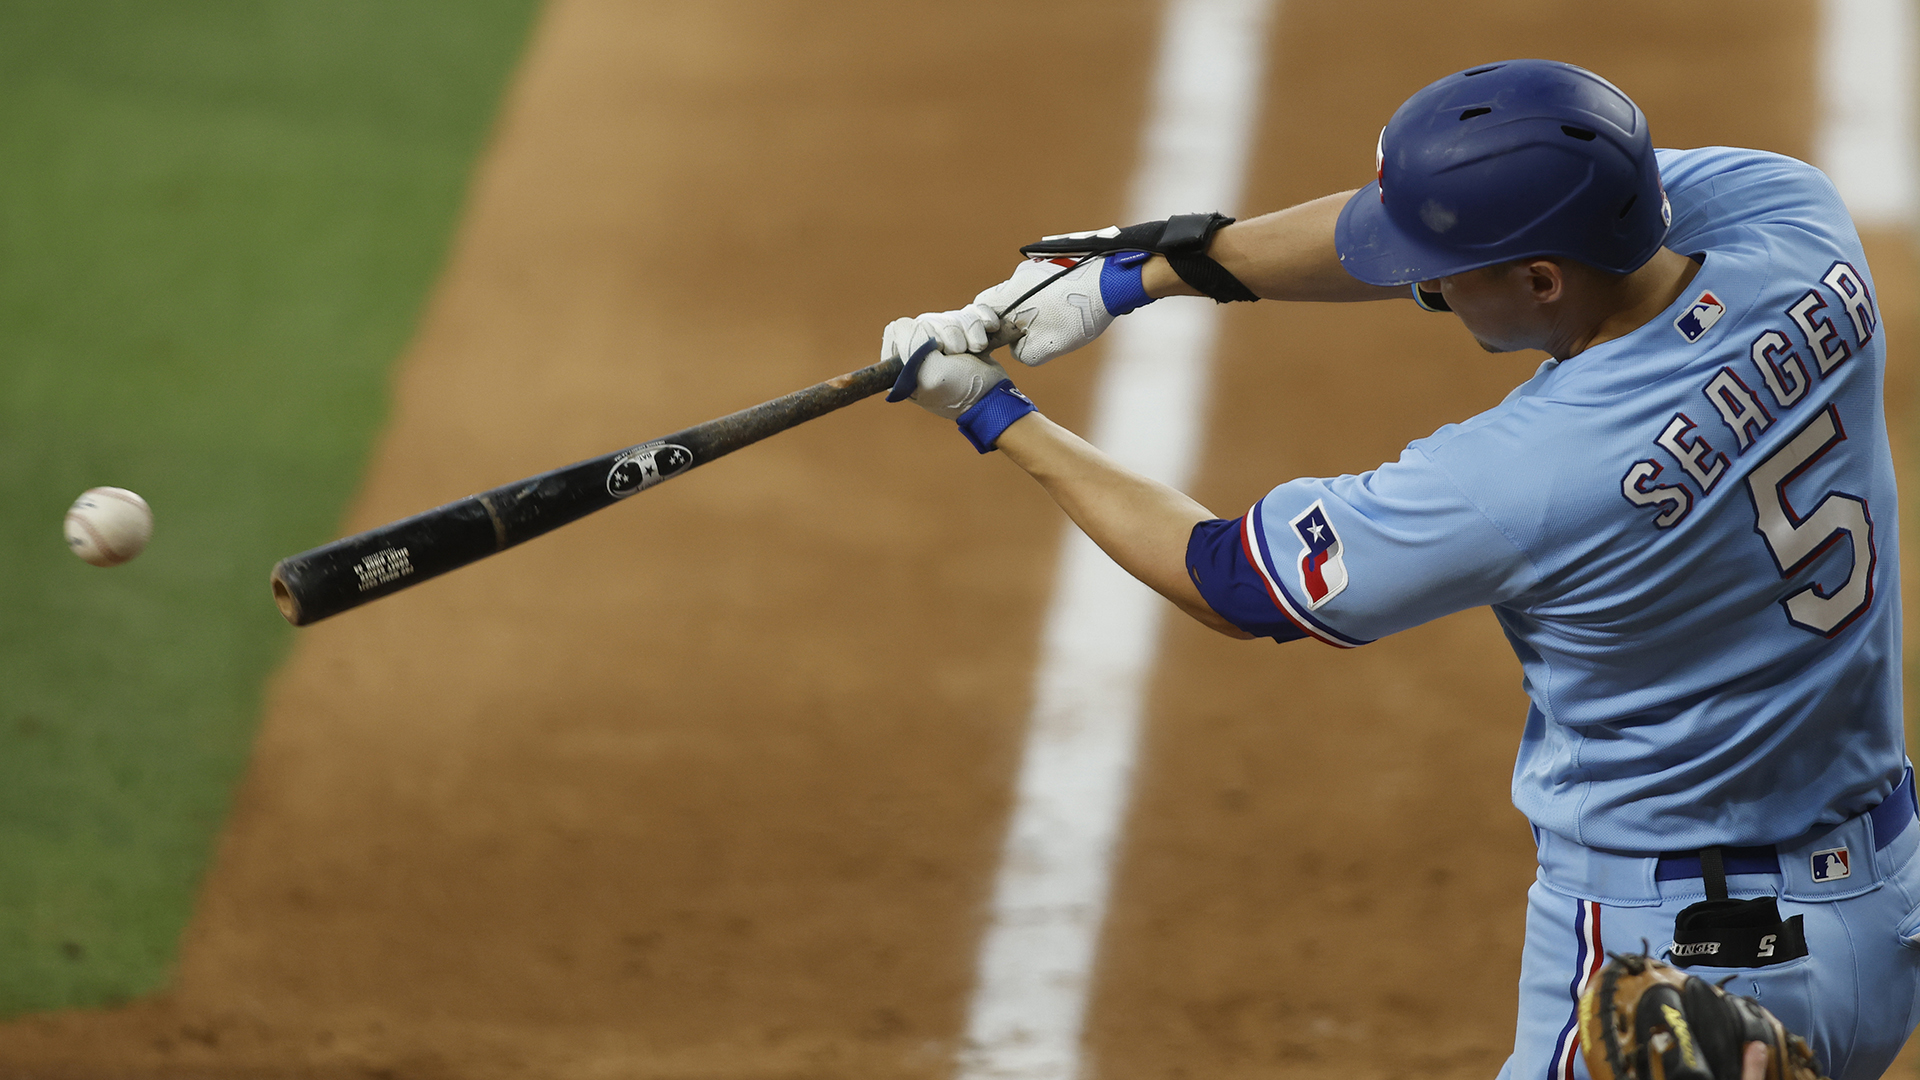 Rangers' Corey Seager back from injured list, to play vs White Sox